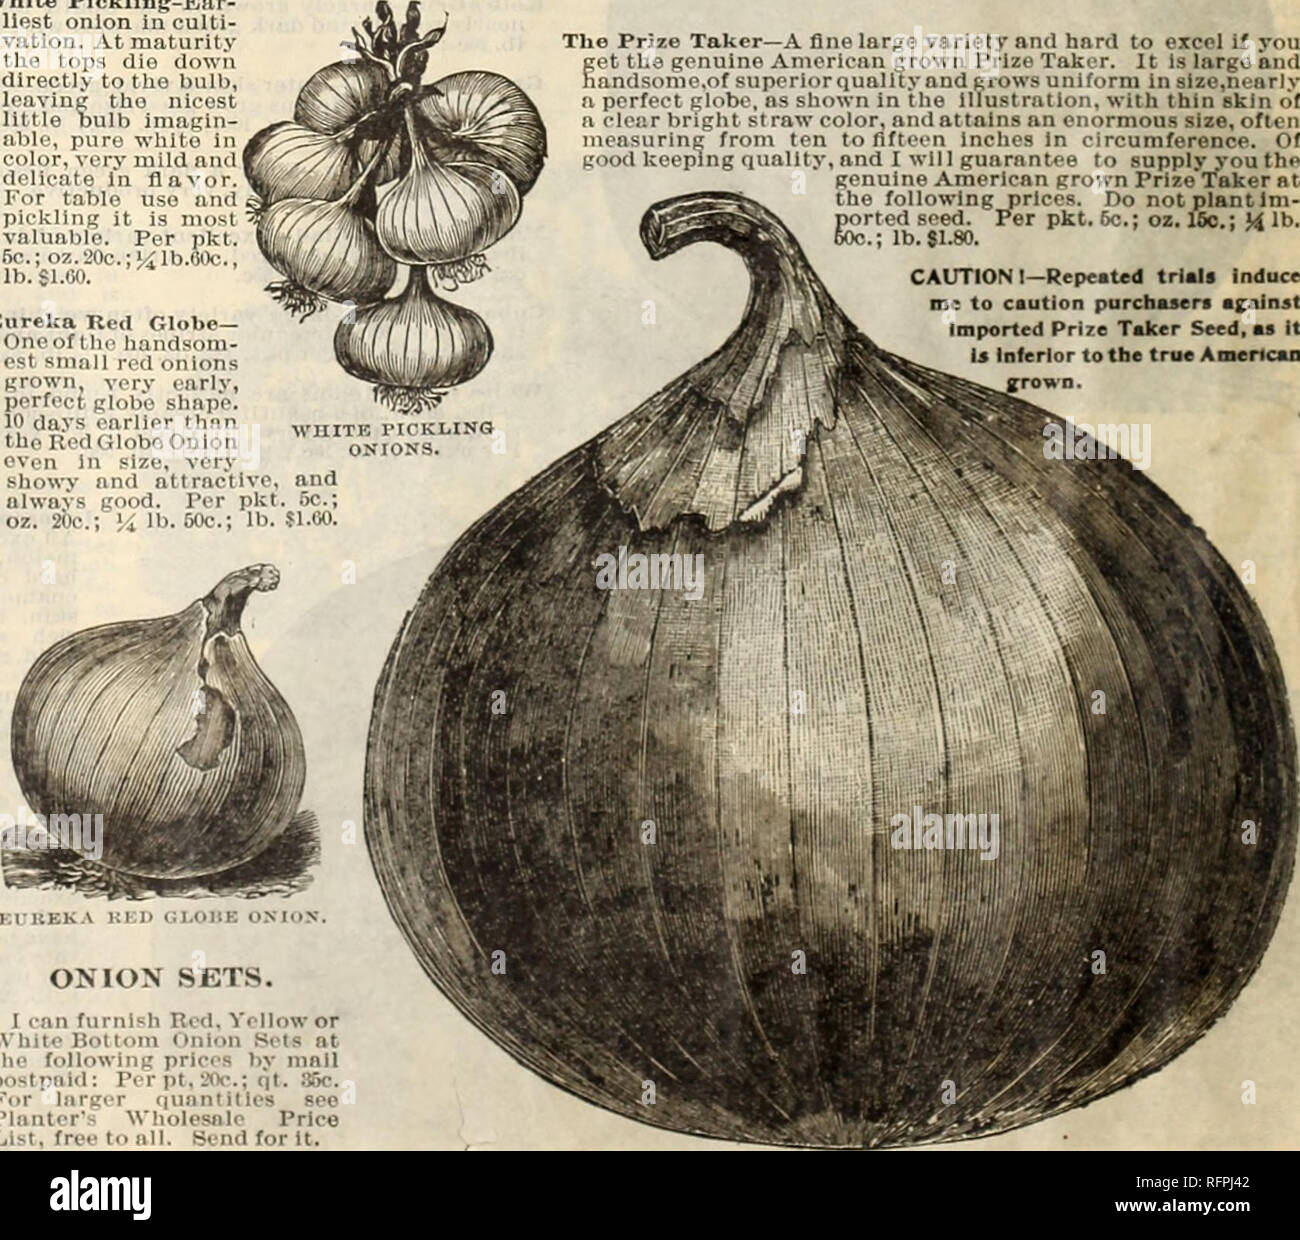 . Mills' garden annual. Nurseries (Horticulture) New York (State) Catalogs; Vegetables Seeds Catalogs; Flowers Seeds Catalogs; Nurseries (Horticulture); Vegetables; Flowers. Mammoth Red Pompeiiâ ThismagniCcent mam- moth onion originated in Italy. It is very fine qual- ity, and has produced onious weighing '2lA to 3 lbs. from tho black seed tho first year. Notwithstanding their enormous size their thapc is always round ana symmetrical, as shown by tho beautiful engraving. Their skin is very thick and delicate in appearance, â n-l It Is a beautiful reddish brown In color. Flesh is pure, white, v Stock Photo